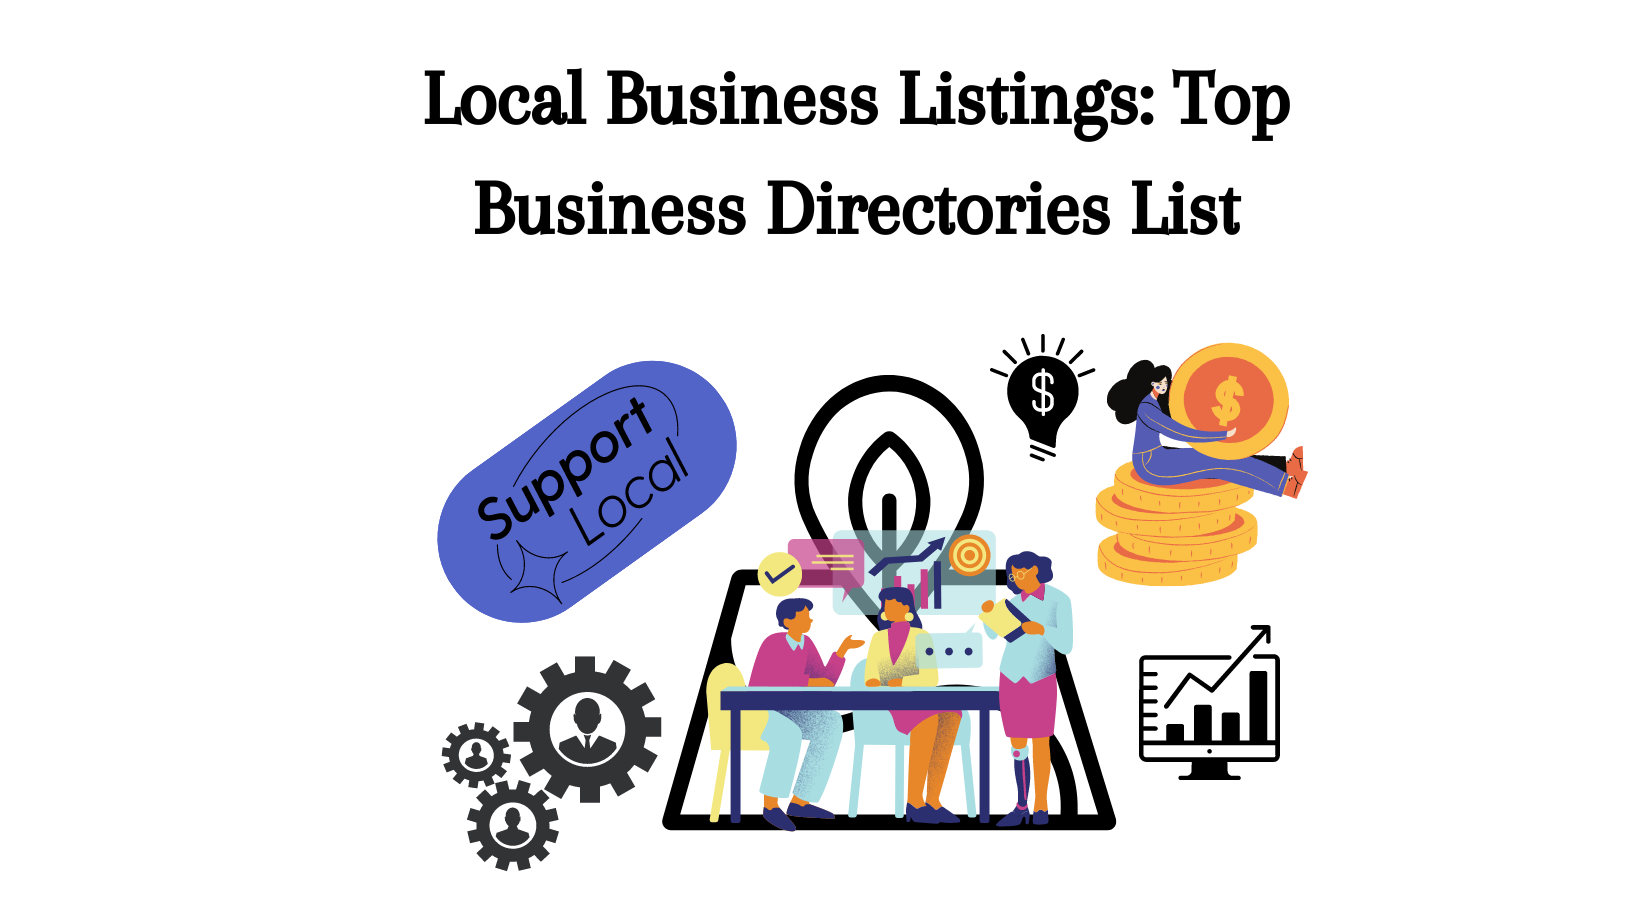 Local Business Listings Top Business Directories List